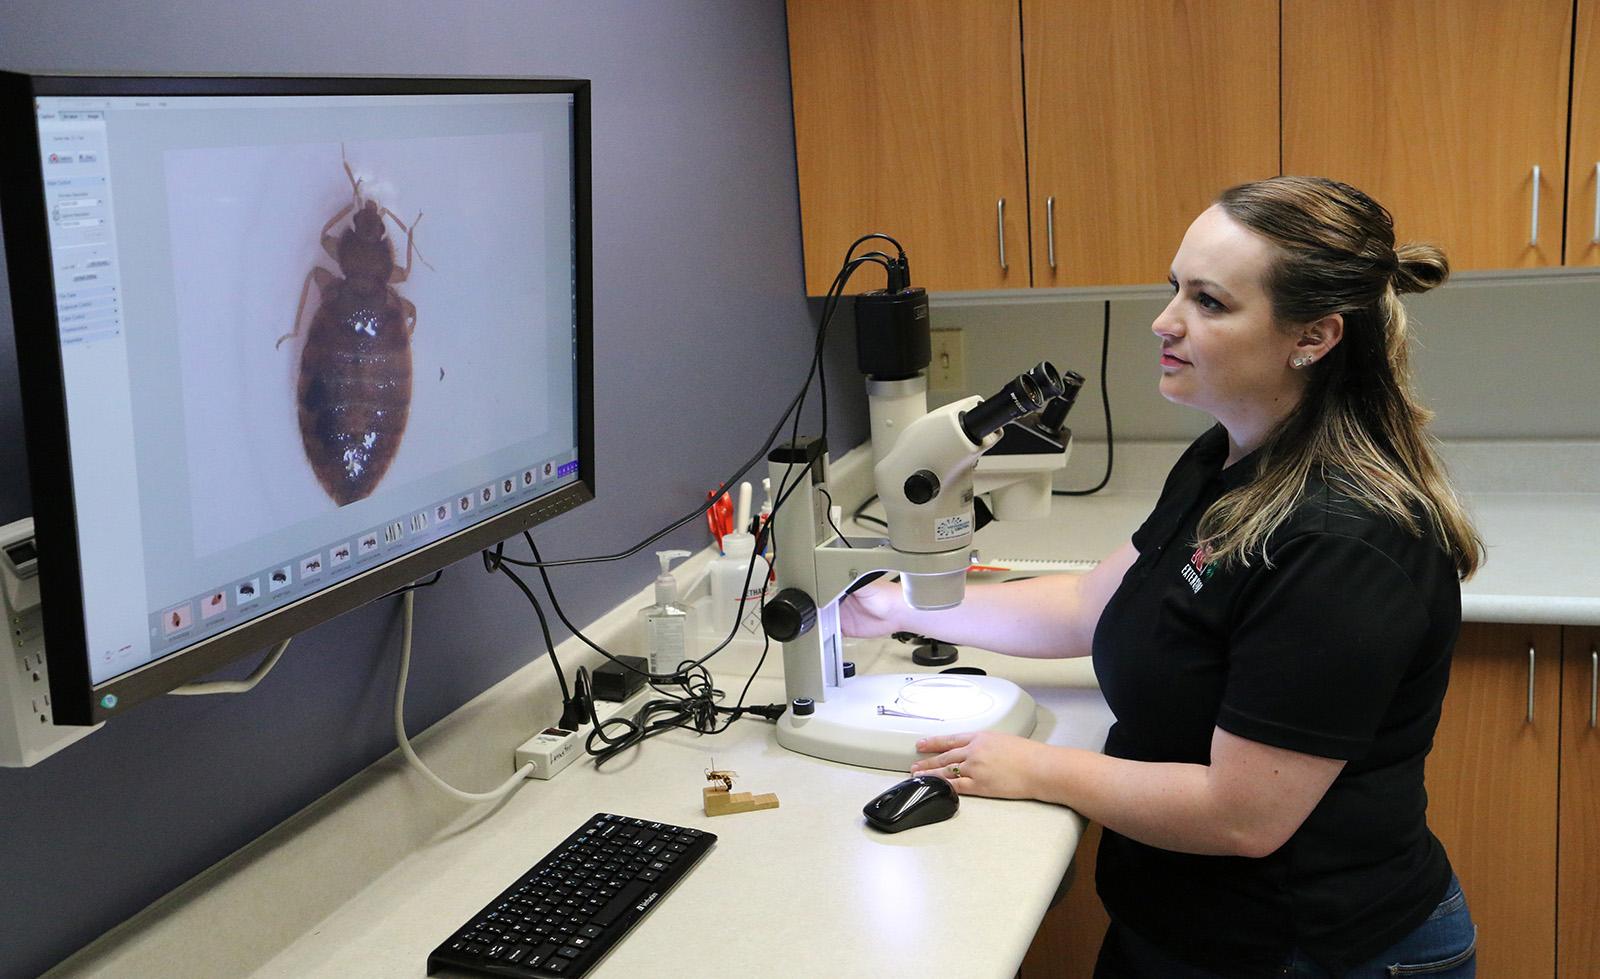 Kait Chapman at digital scope looking at bed bug on screen